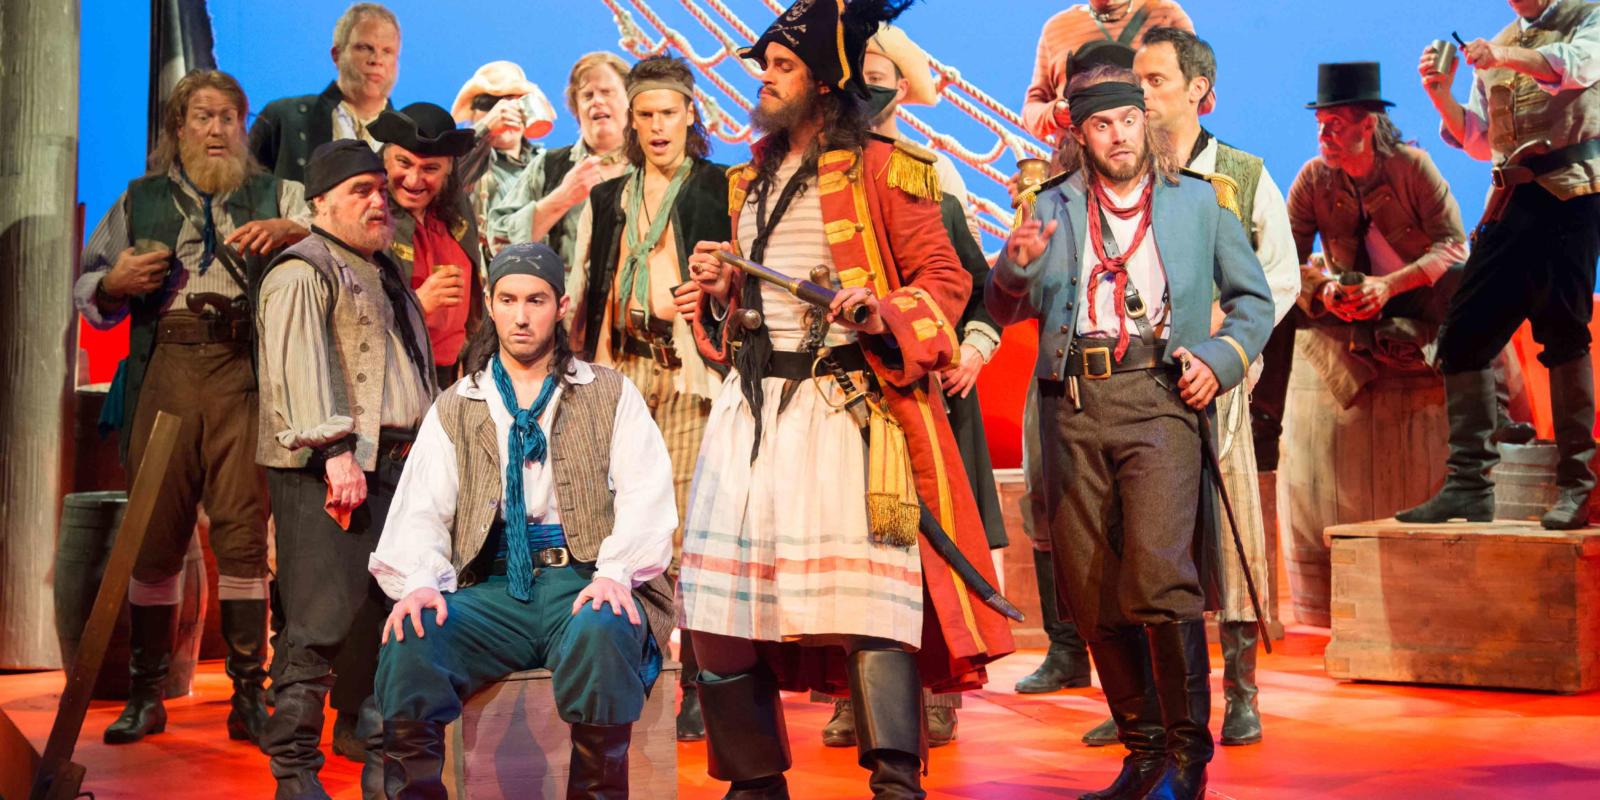 ENO's The Pirates of Penzance - David Webb as Frederic, Ashley Riches as The Pirate King, Johnny Herford as Samuel and ENO Chorus. Photo by Tom Bowles